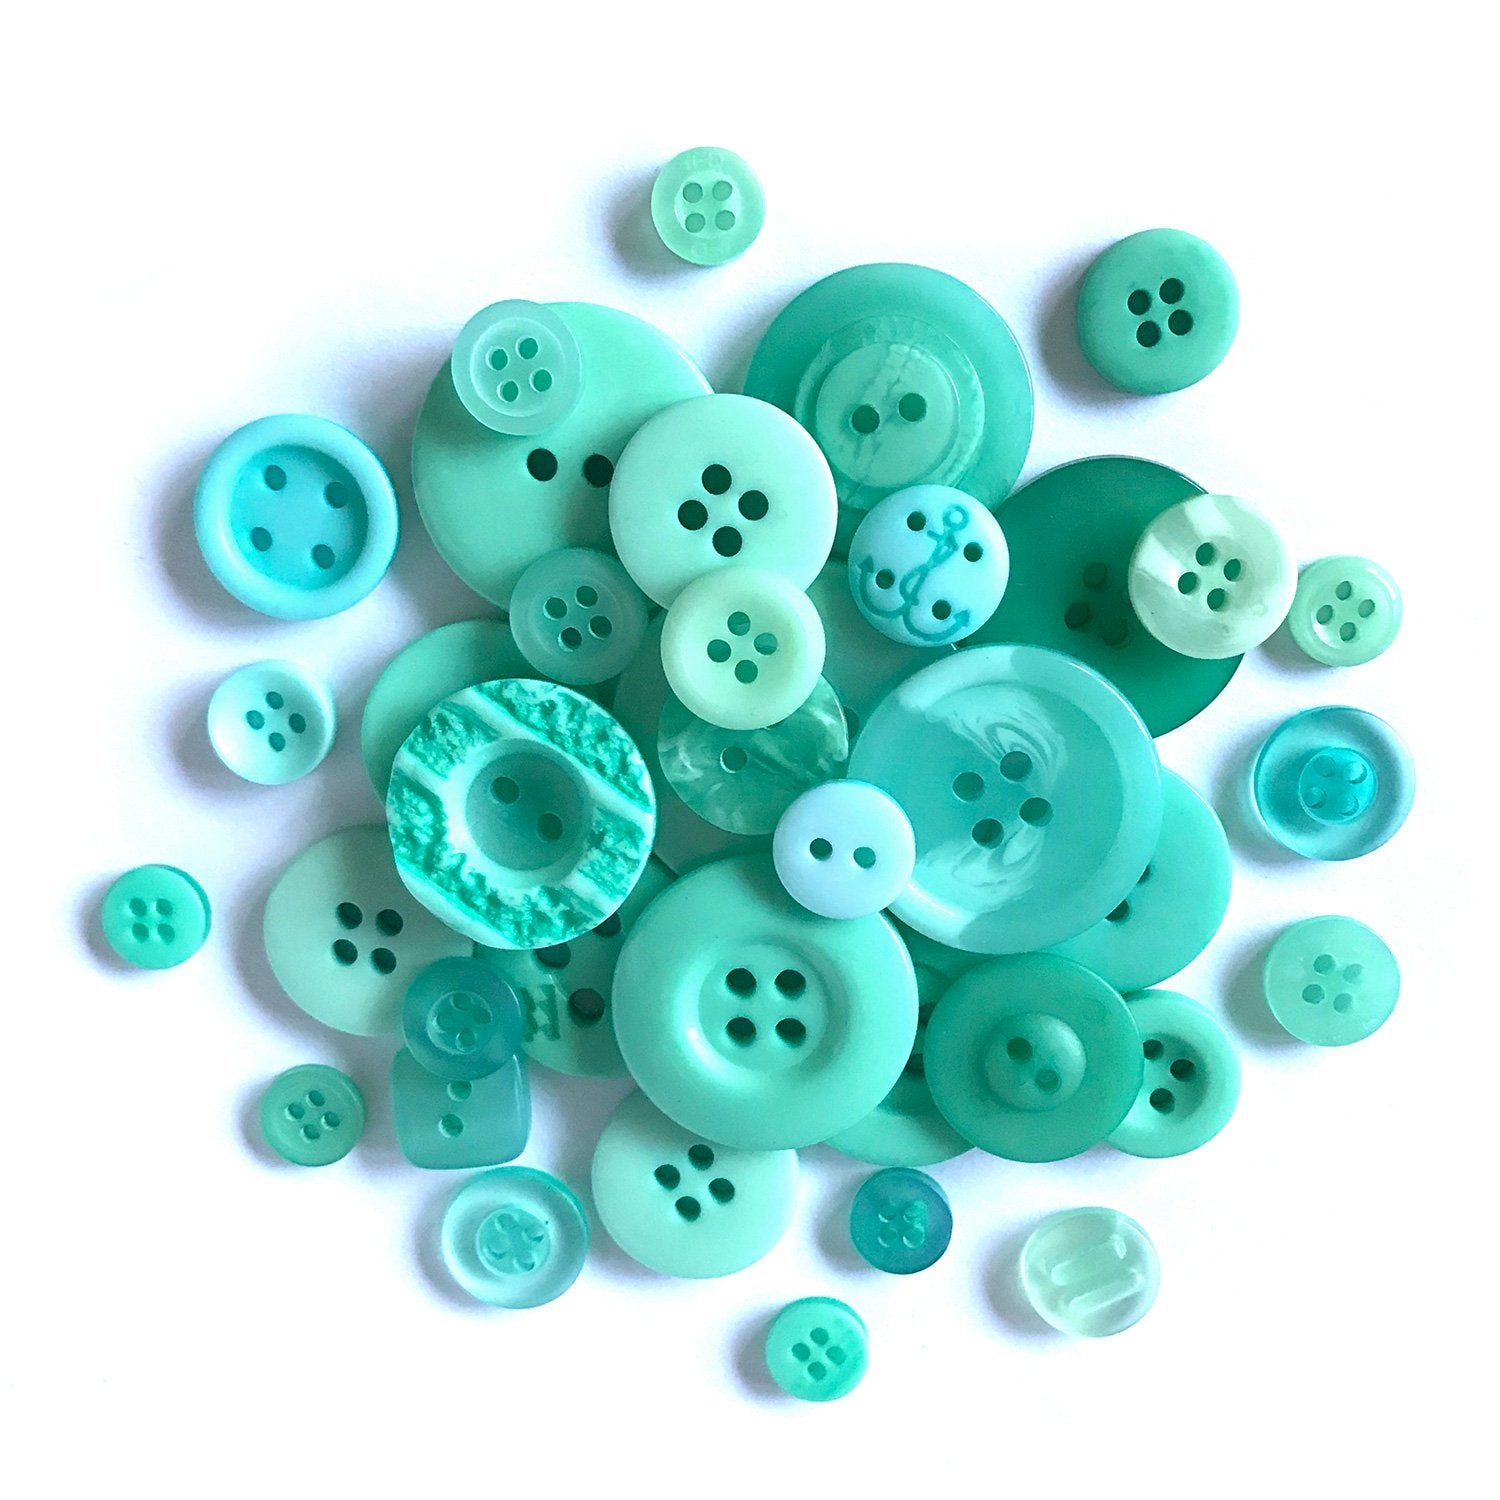 Light Blue Buttons for Crafts Sewing Scrapbooks and Quilts. Assorted sizes  including small light blue buttons